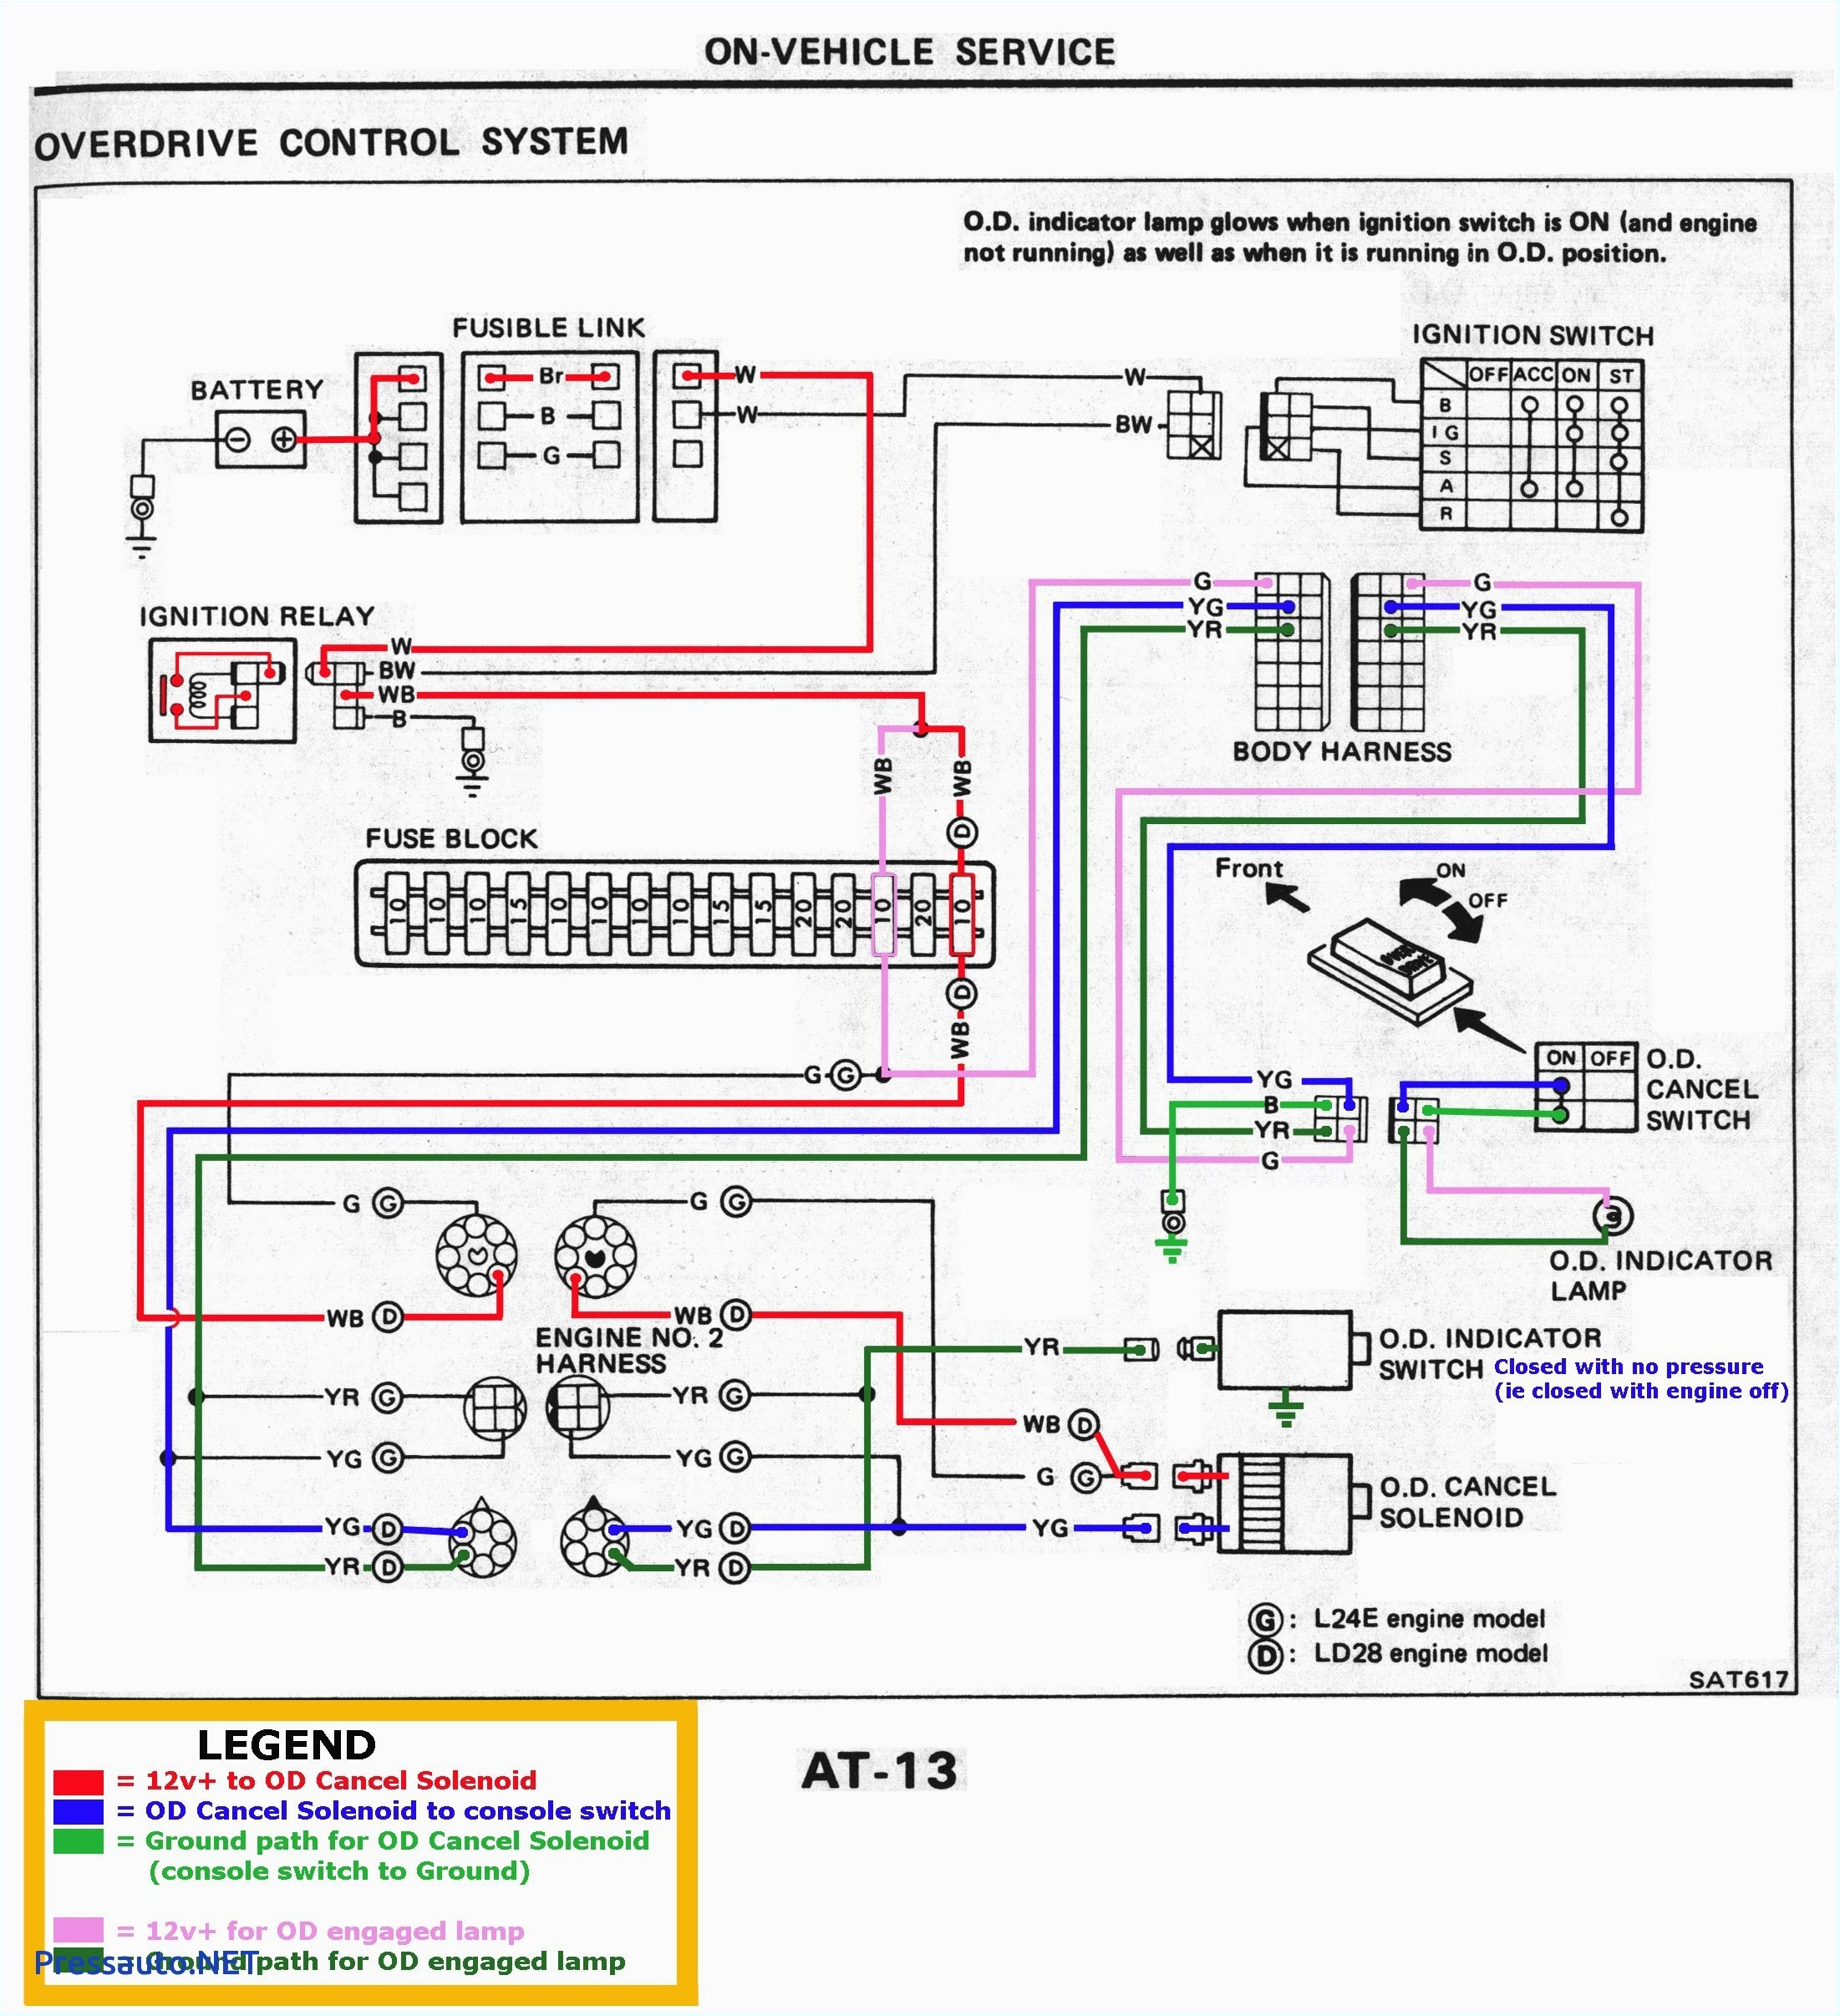 Apexi Power Fc Wiring Diagram Apexi Power Fc Wiring Diagram Awesome Use the form Below to Delete